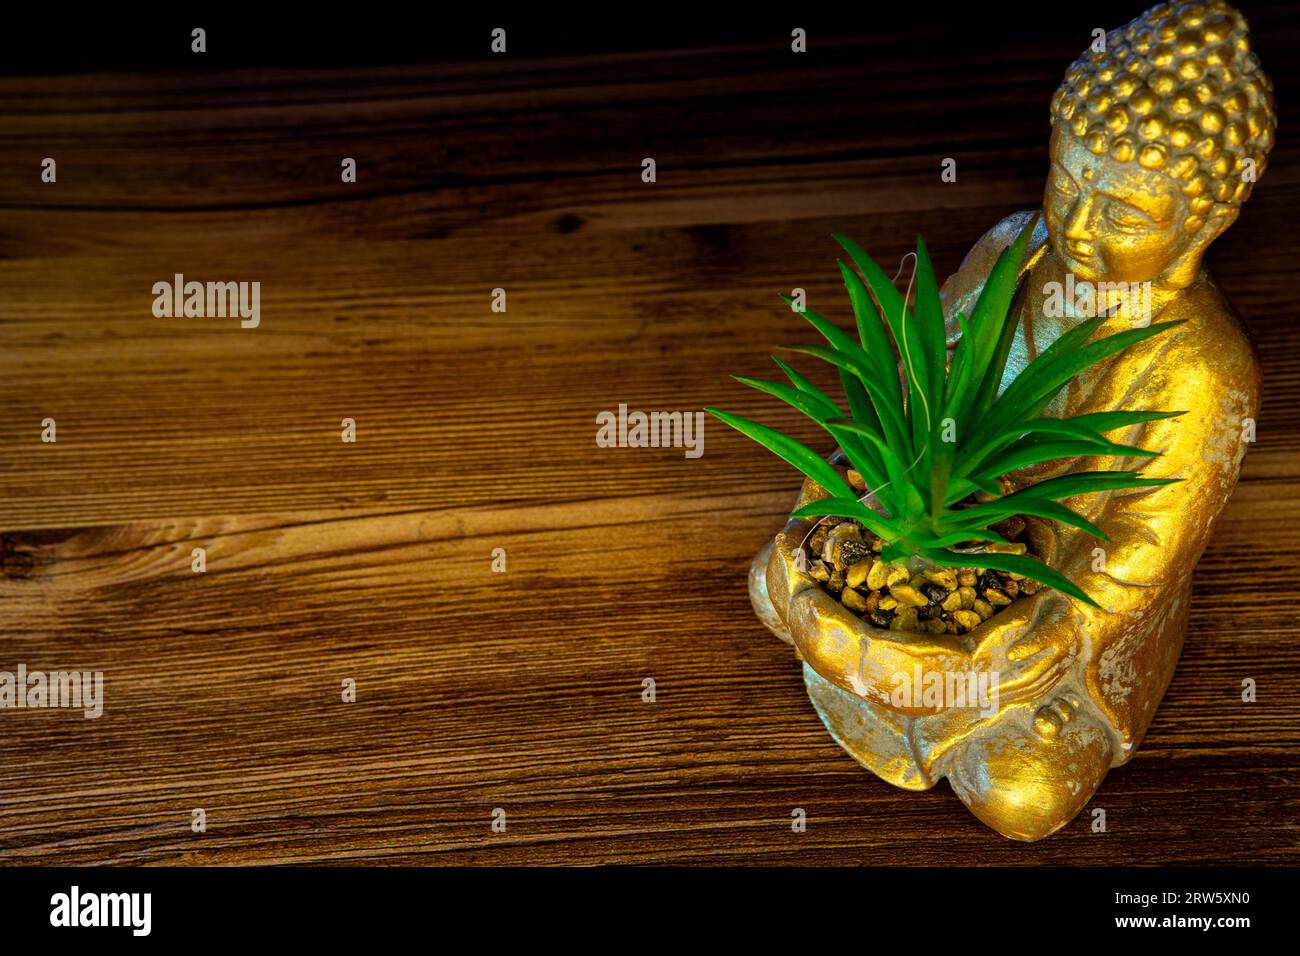 Buddha statue with a succulent plant single on a wooden background Stock Photo